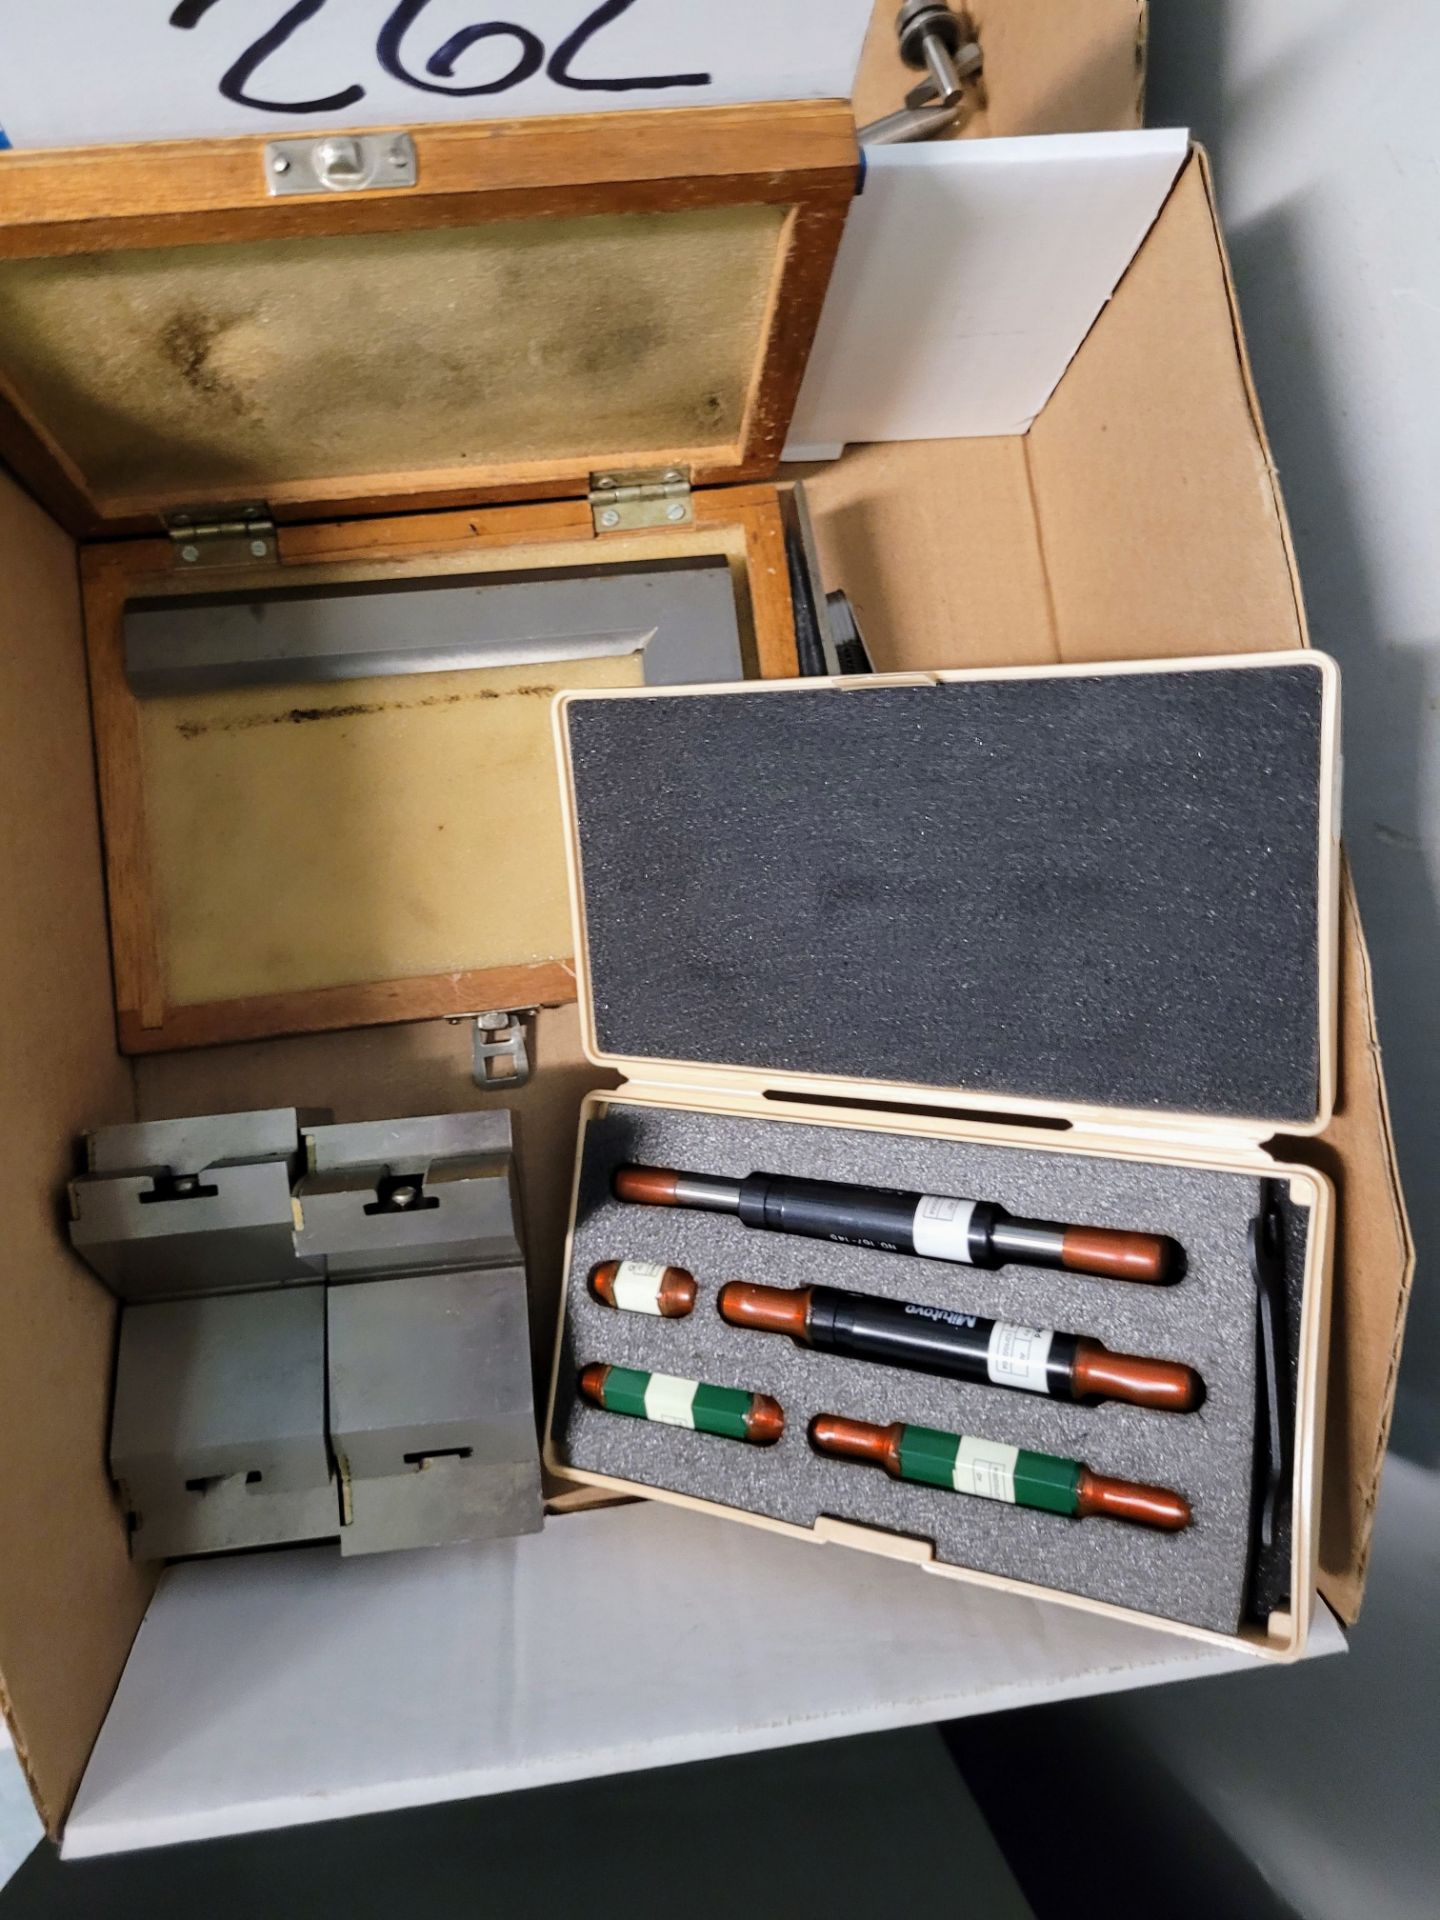 LOT OF (4) BOXES OF TEST & MEASUREMENT GAUGES, VERNIER, RIGHT ANGLE BLOCK, TELESCOPING GAUGES, - Image 5 of 5